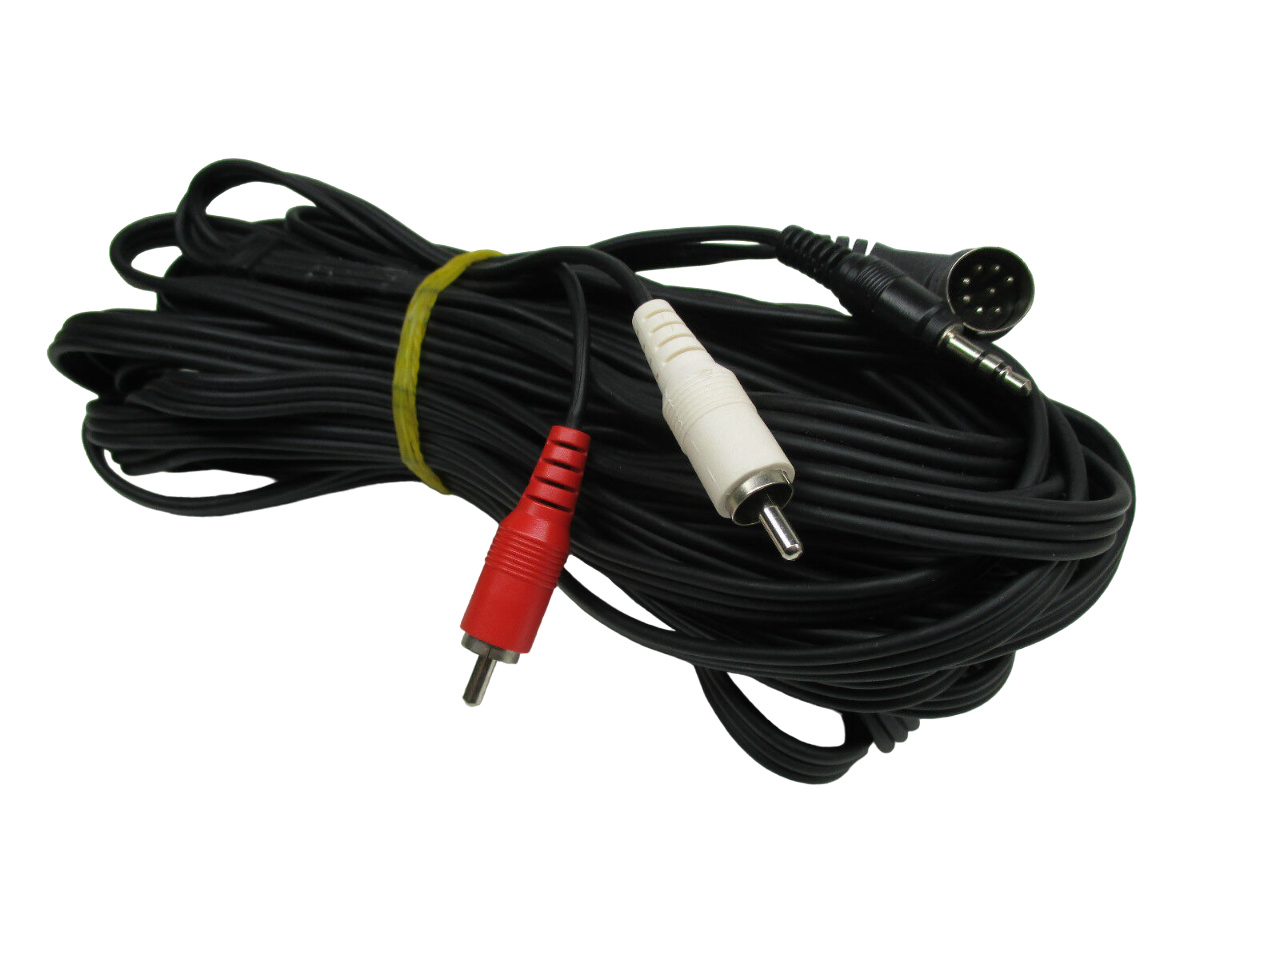 8 pin Audio Input Cable Part, for Acoustimass LifeStyle 800